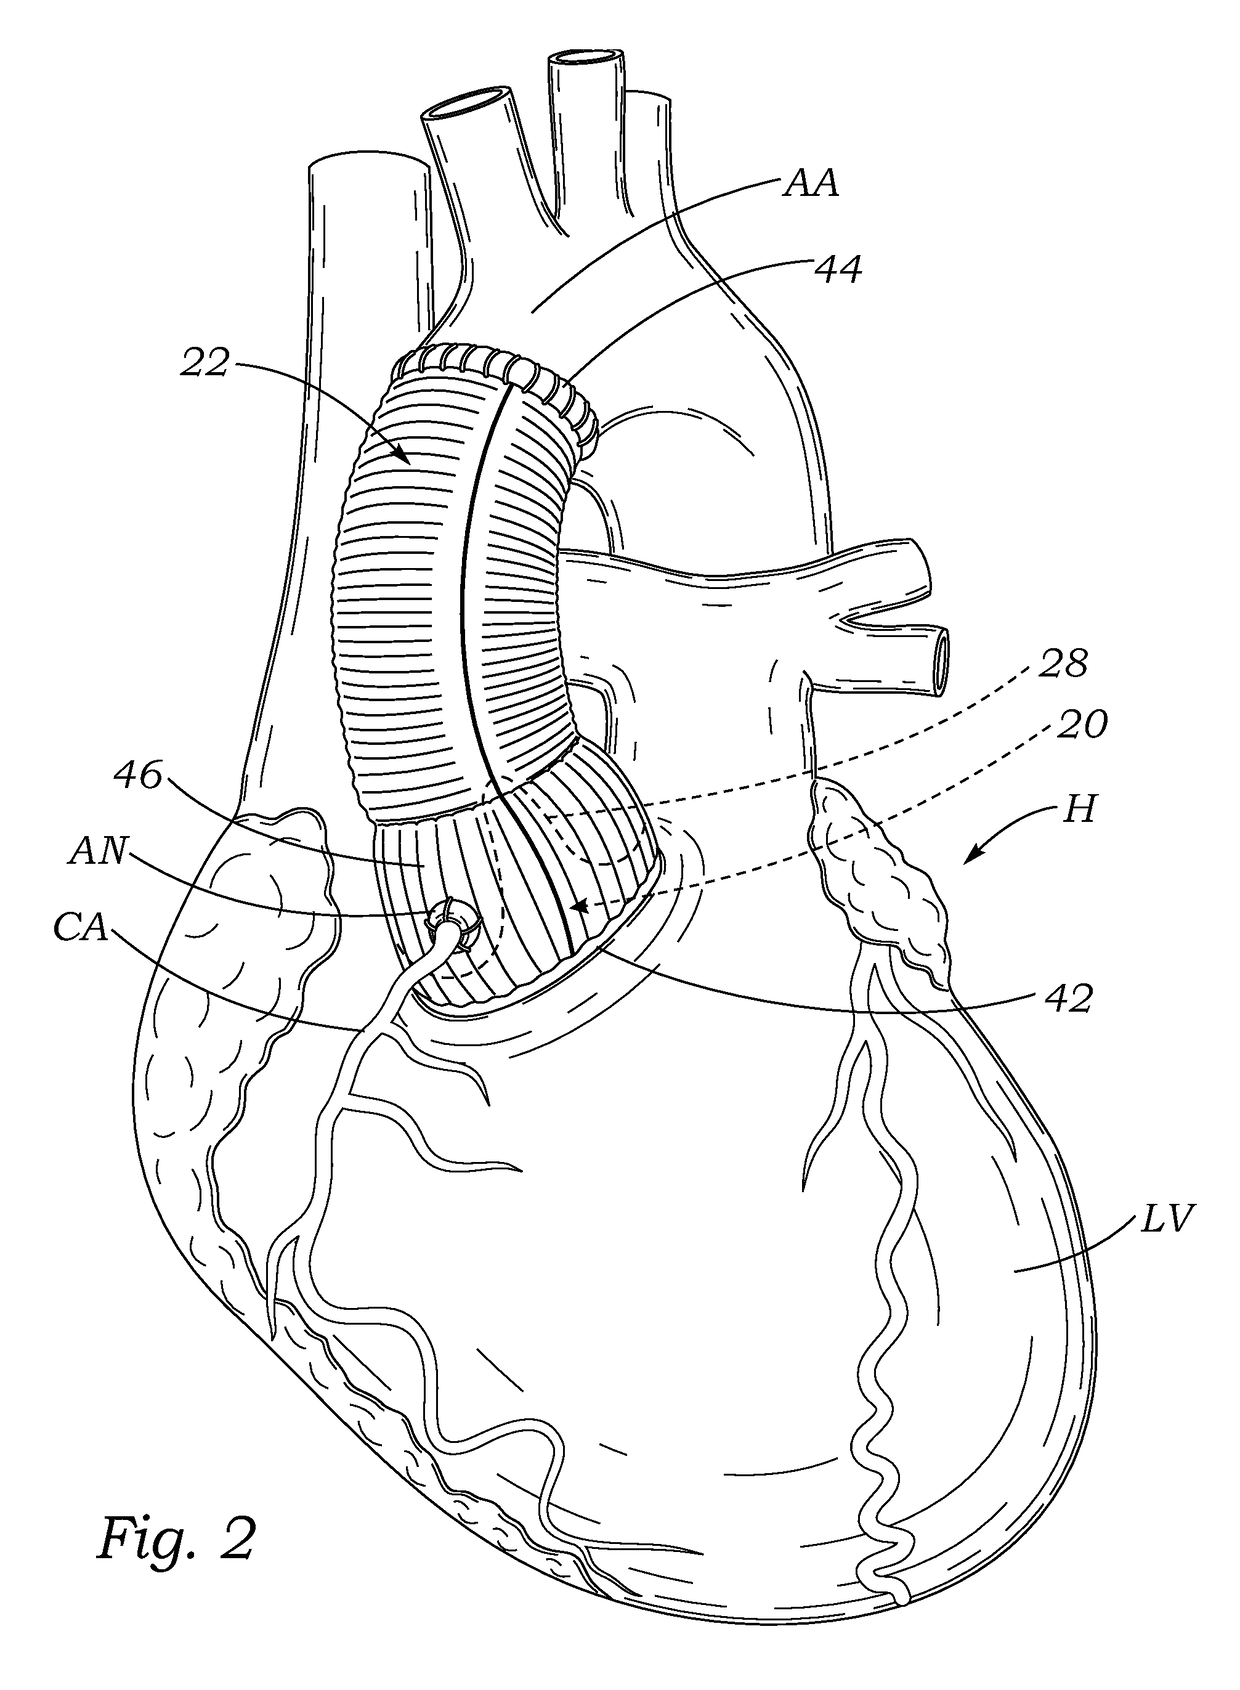 Aortic valve and conduit graft implant tool